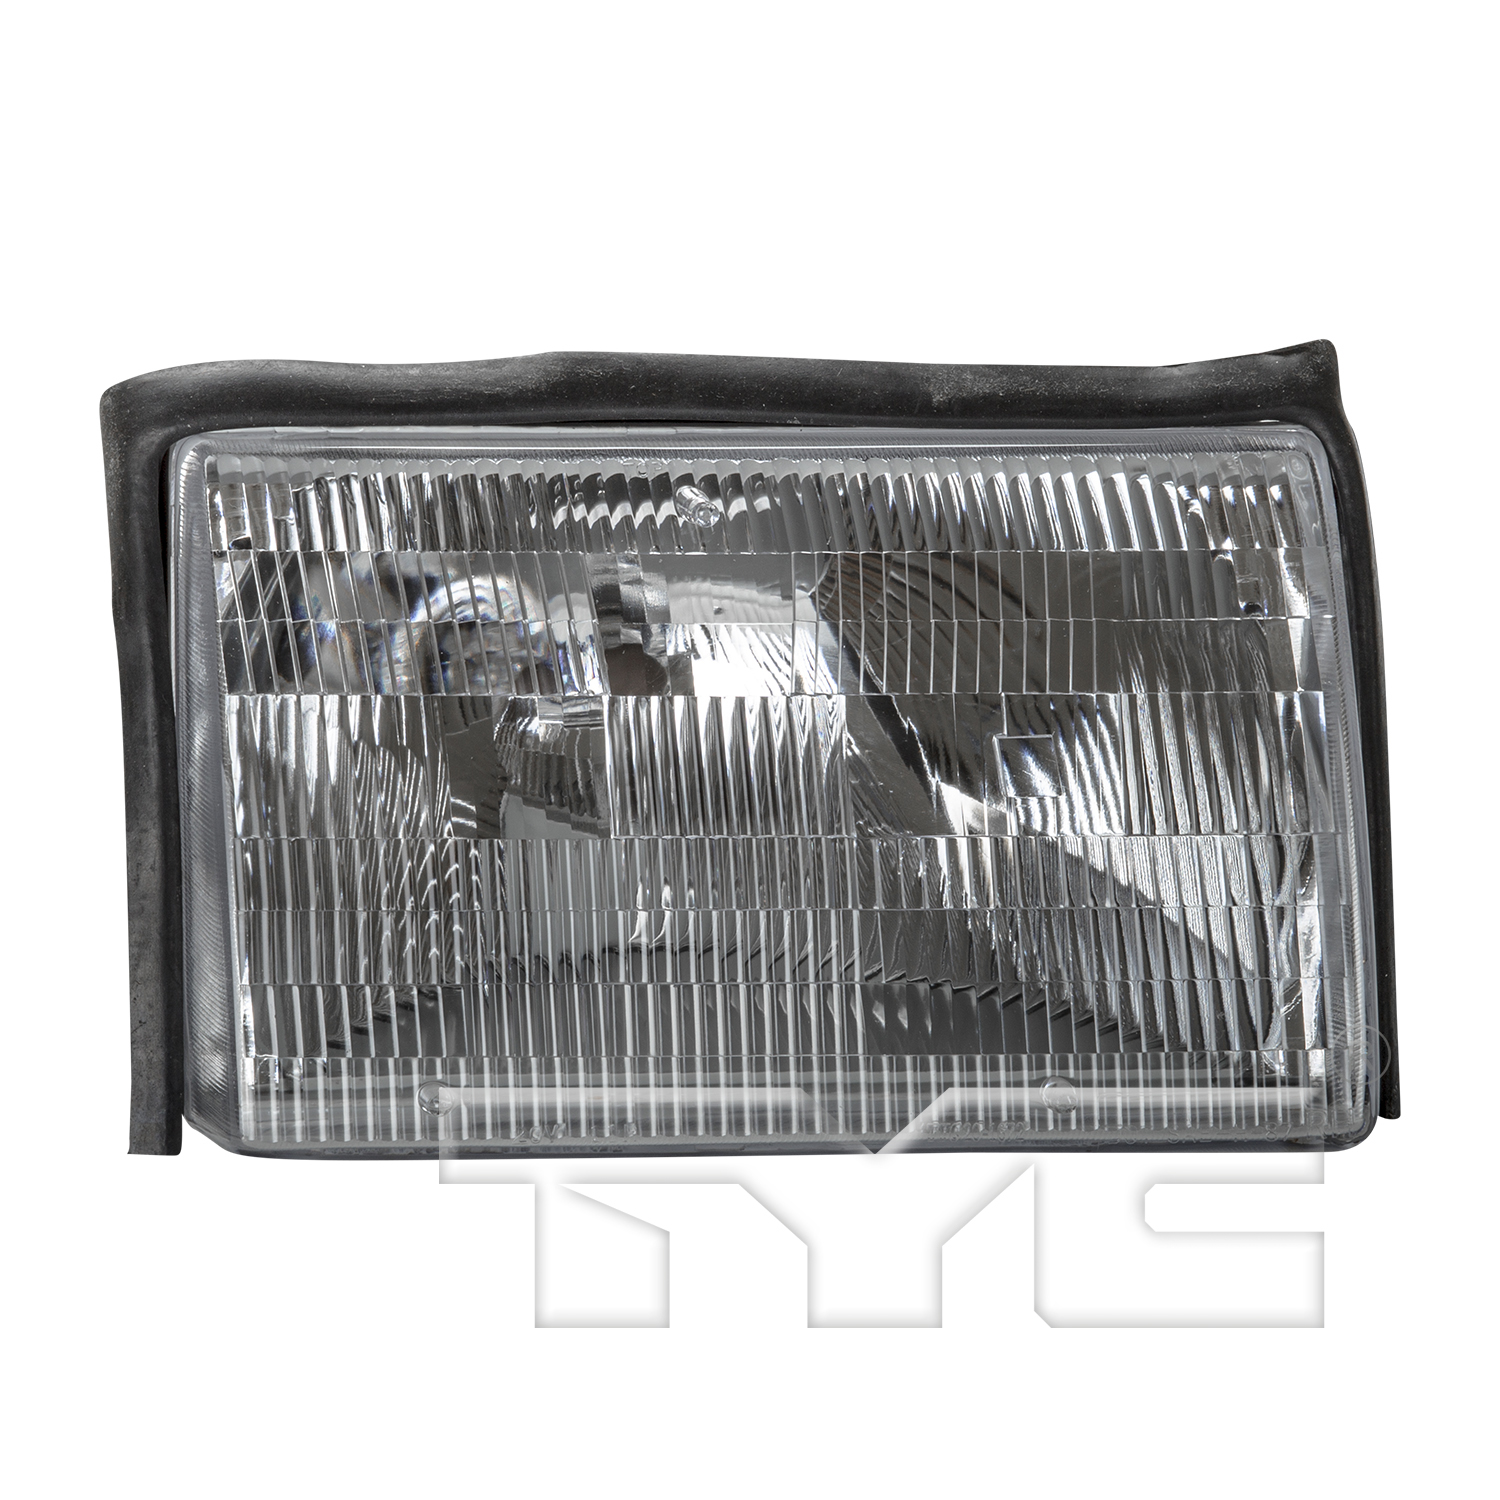 Aftermarket HEADLIGHTS for FORD - MUSTANG, MUSTANG,87-93,RT Headlamp assy composite